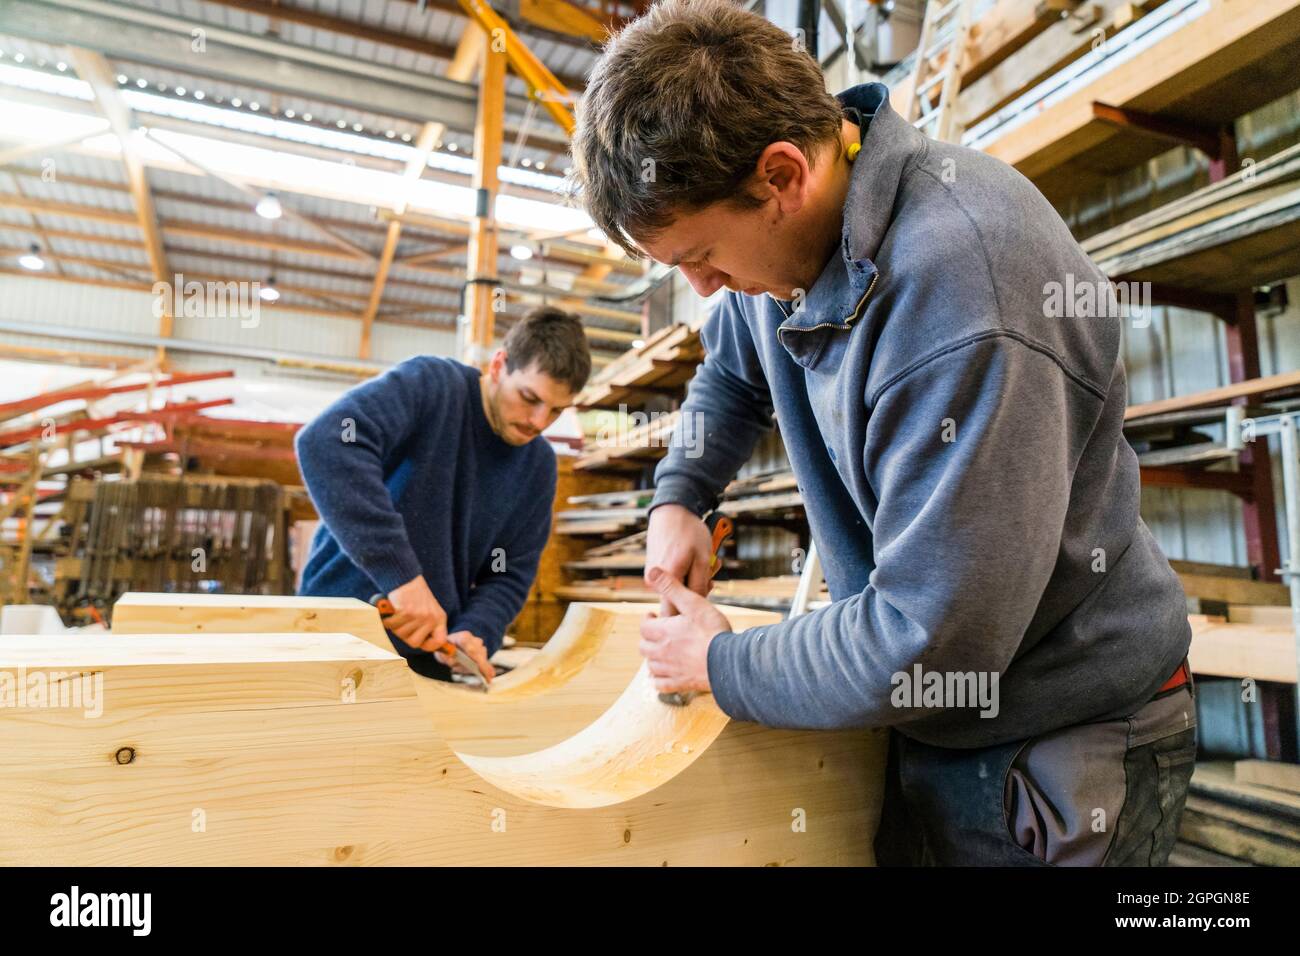 France, Finistere, Brest, Guip Shipyard, marine carpenters work on pieces of wood Stock Photo